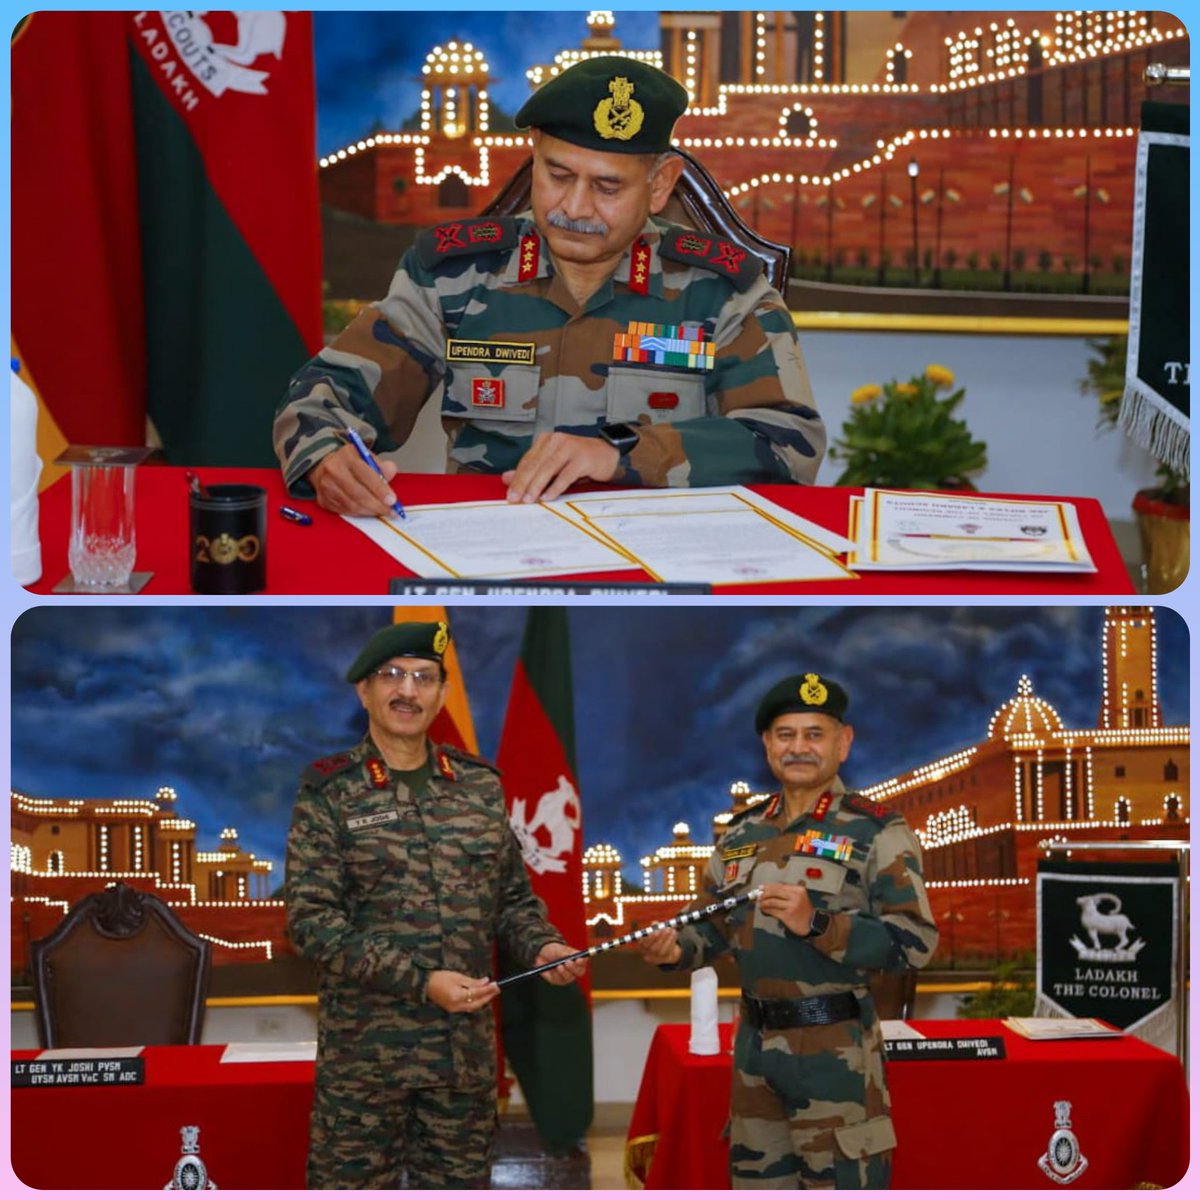 Delhi l Newly-appointed Northern Army commander #LtGenUpendra Dwivedi took over as the Colonel of the Jammu & Kashmir Rifles & Ladakh Scouts Regiments from #LtGenYKJoshi who superannuated today .

#IndianArmyPeoplesArmy
#StrongandCapable
@SpokespersonMoD 
@proshillong